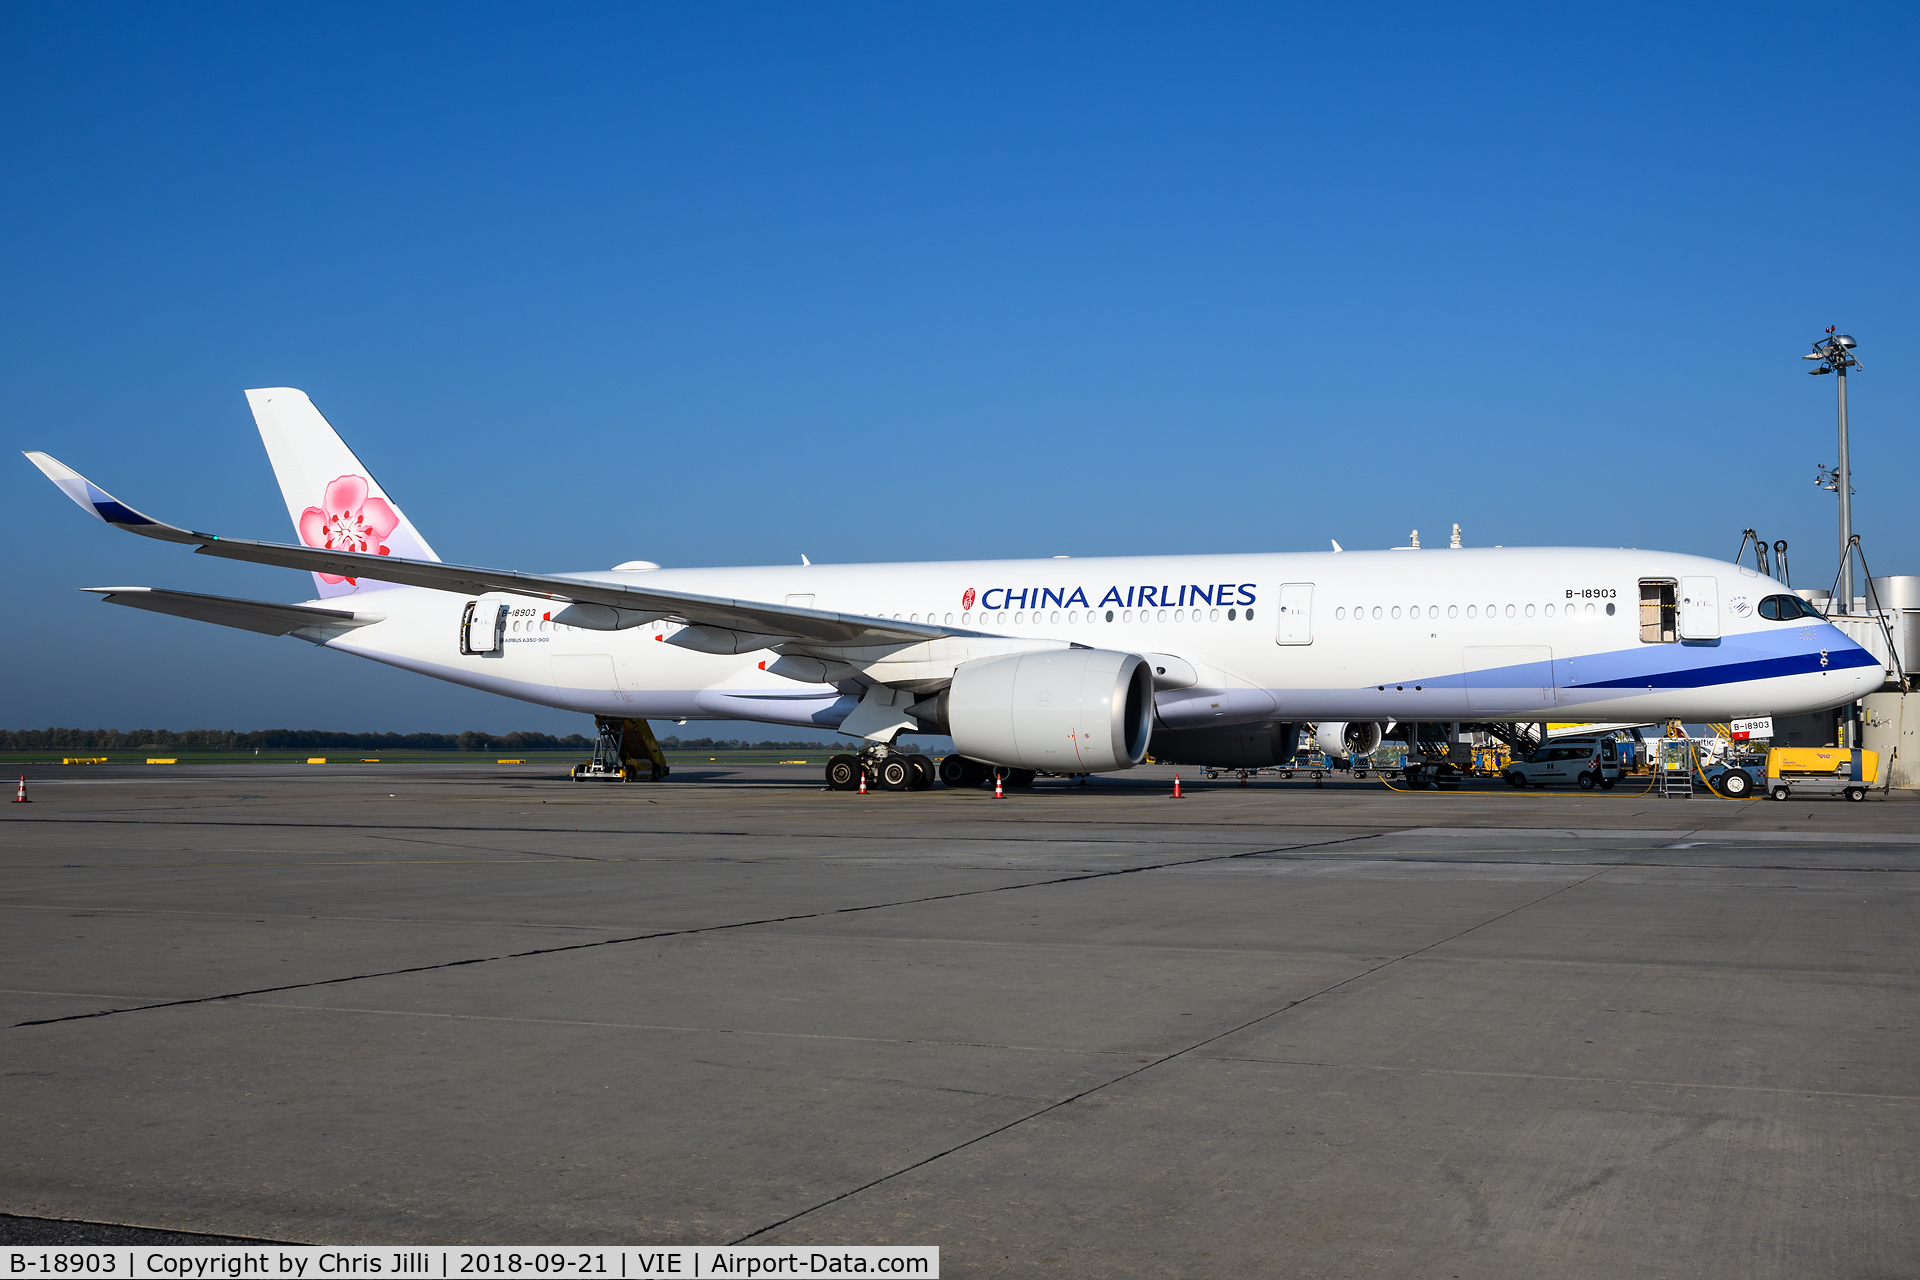 B-18903, 2016 Airbus A350-941 C/N 066, China Airlines